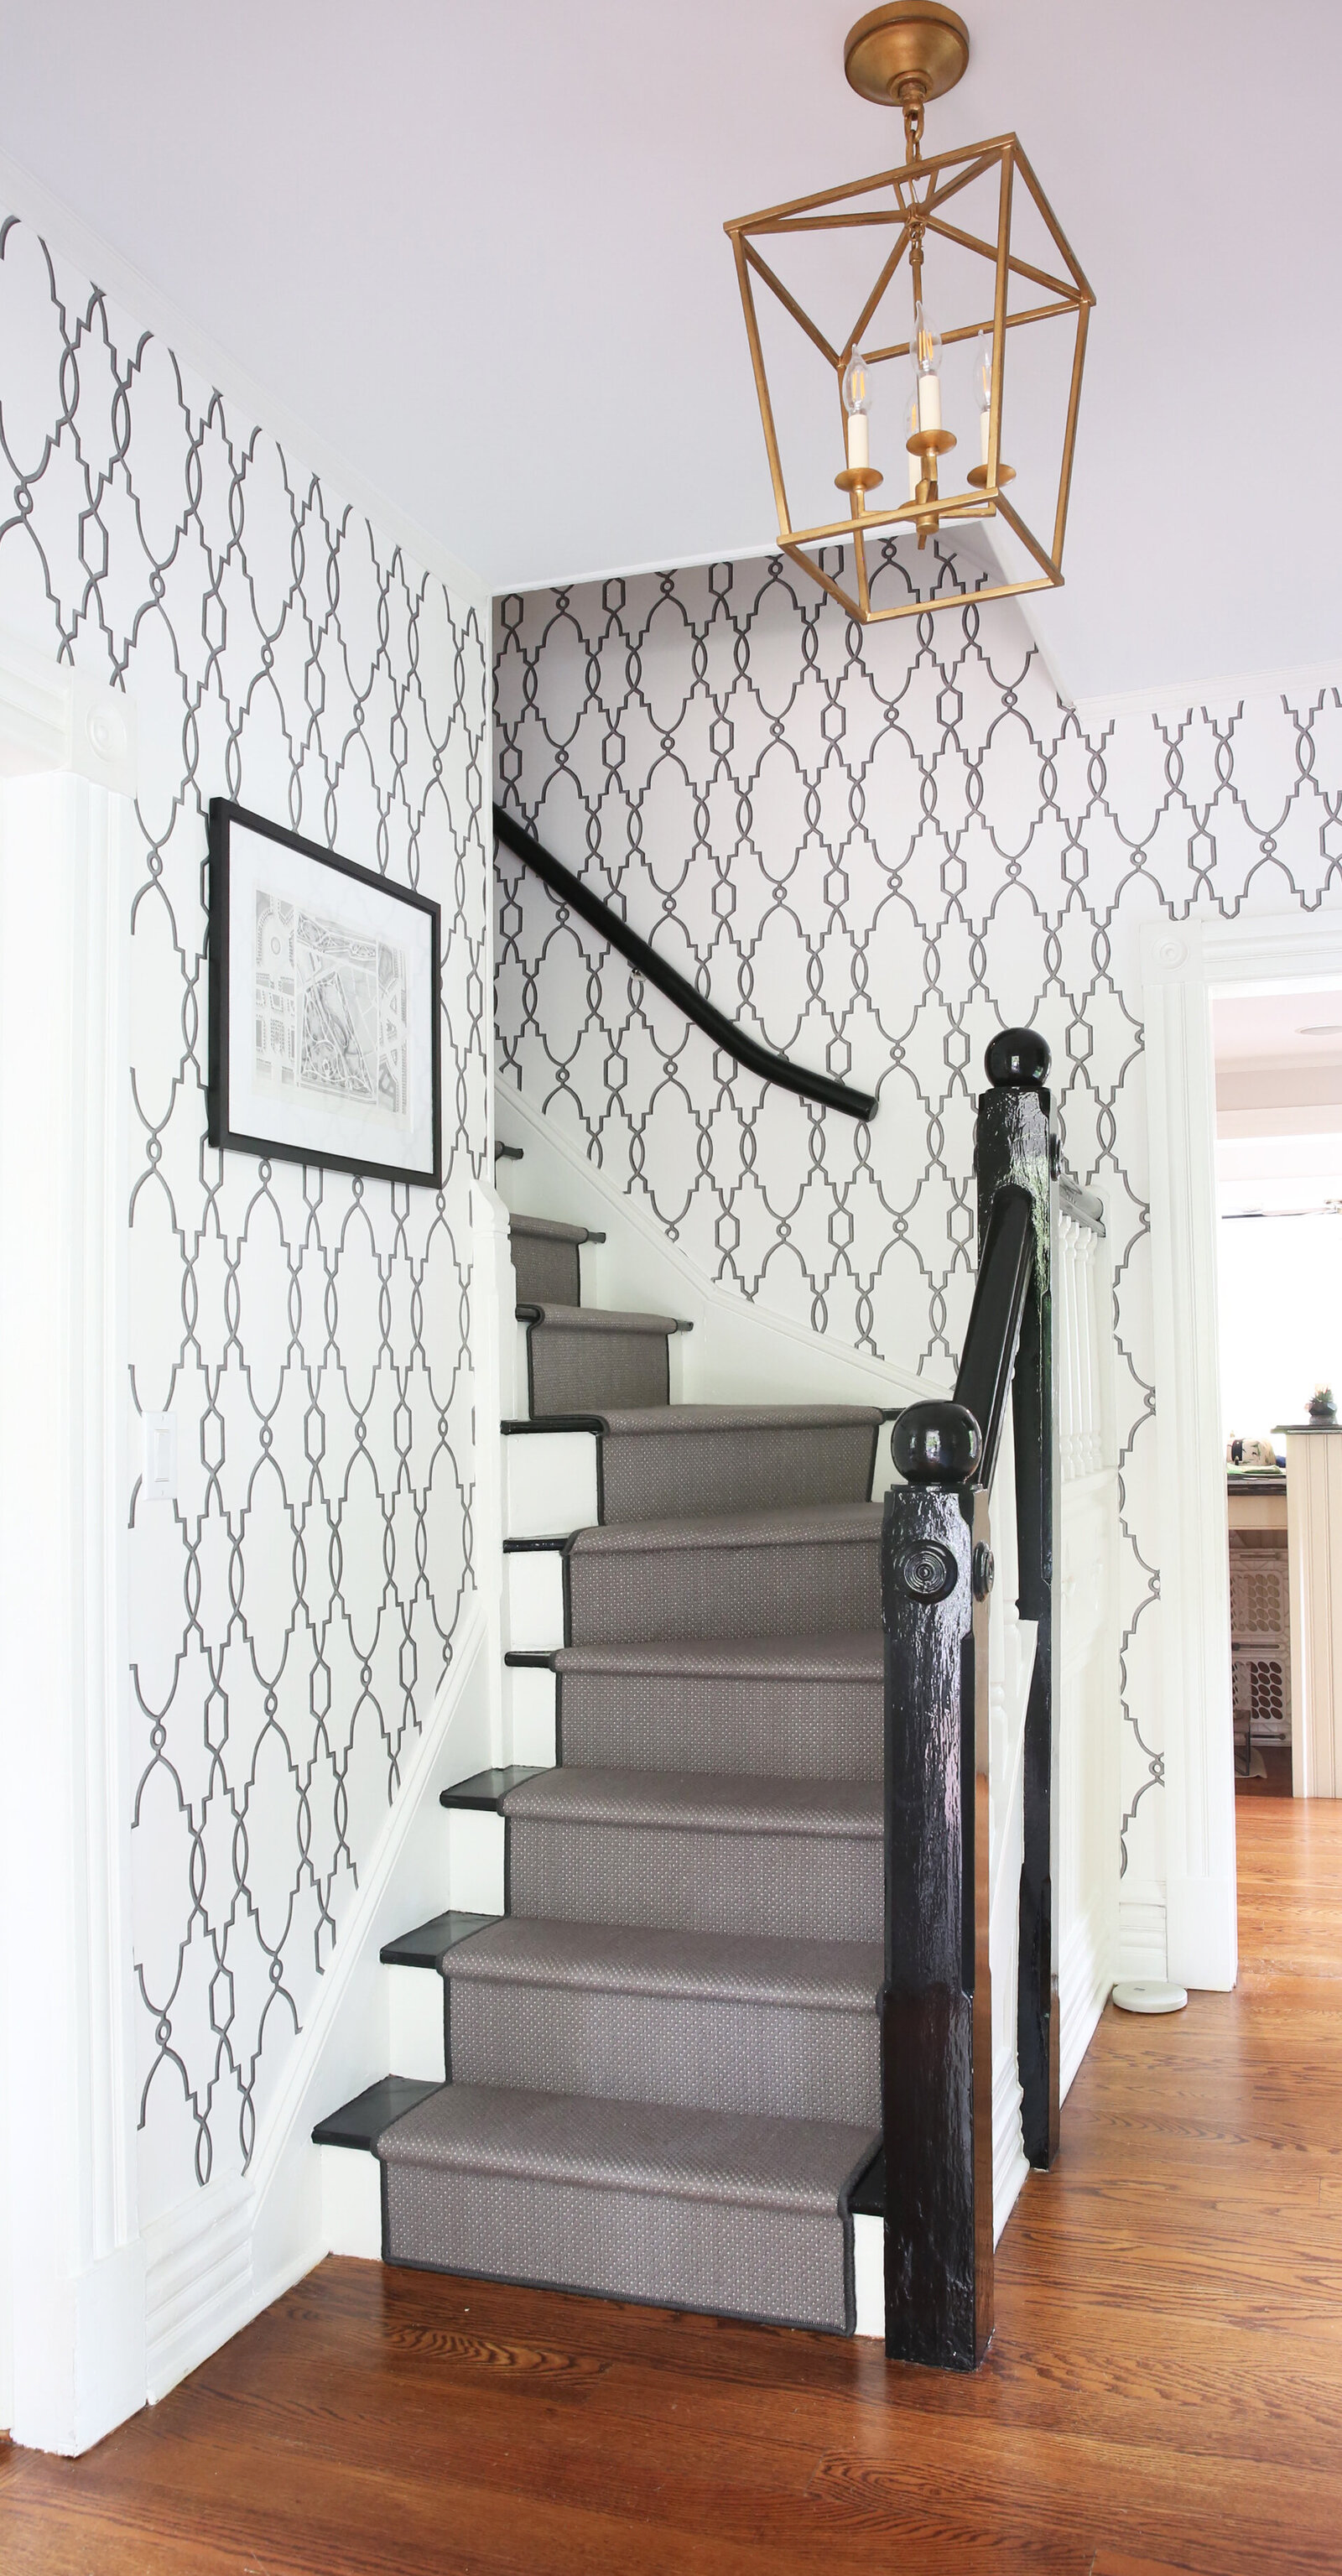 STAIR-WITH-BLACK-PAINTED-HIGH-GLOSS-RAILINGS